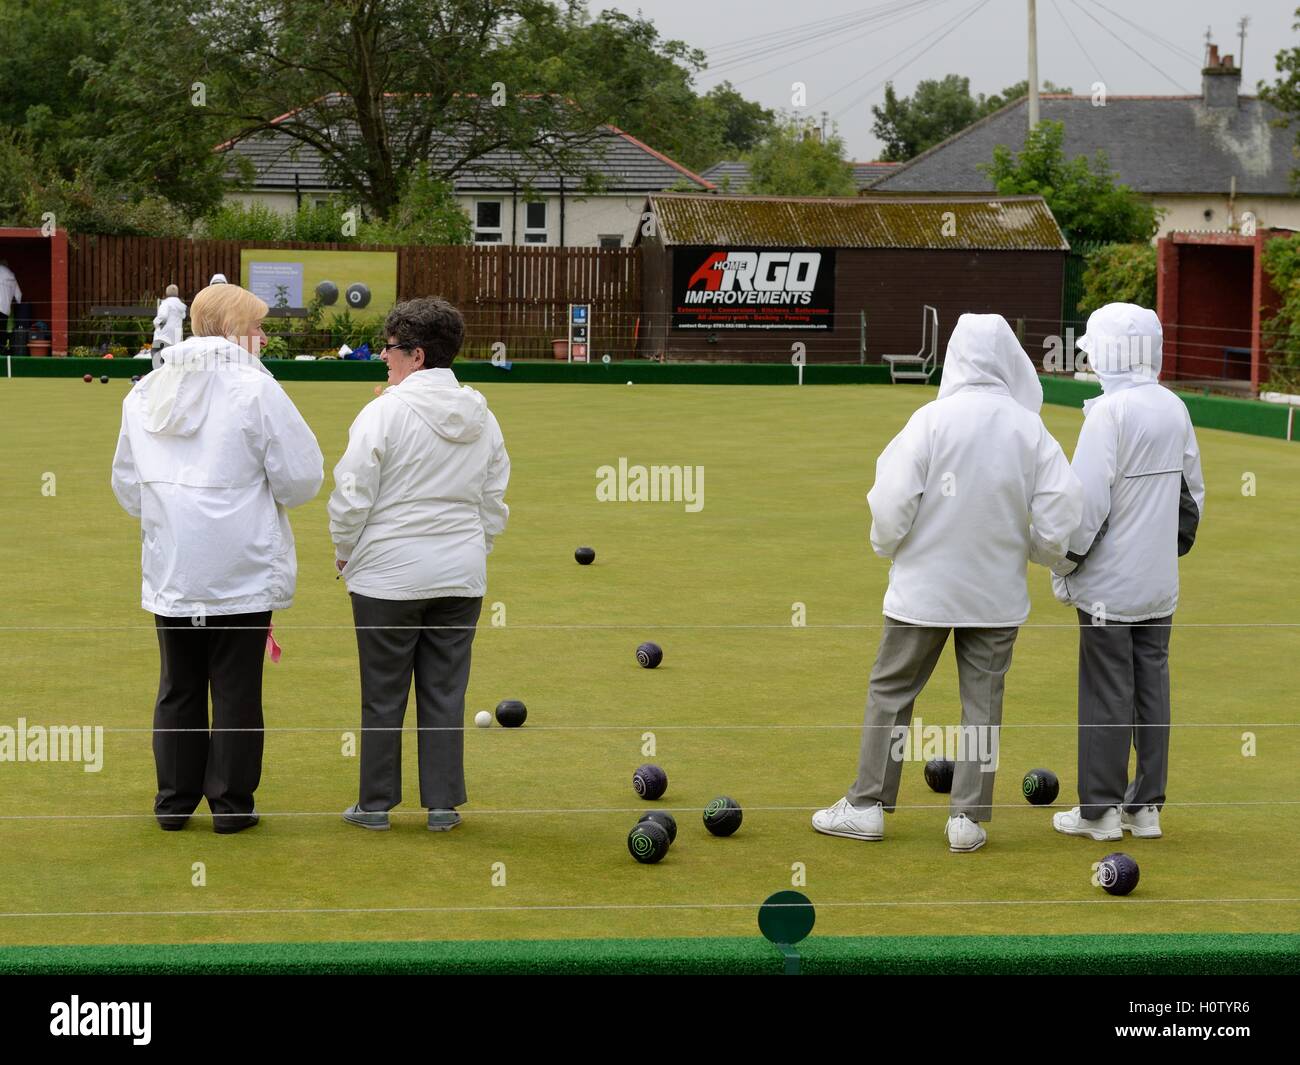 Women lawn bowlers wearing traditional white jackets in inclement weather. Stock Photo